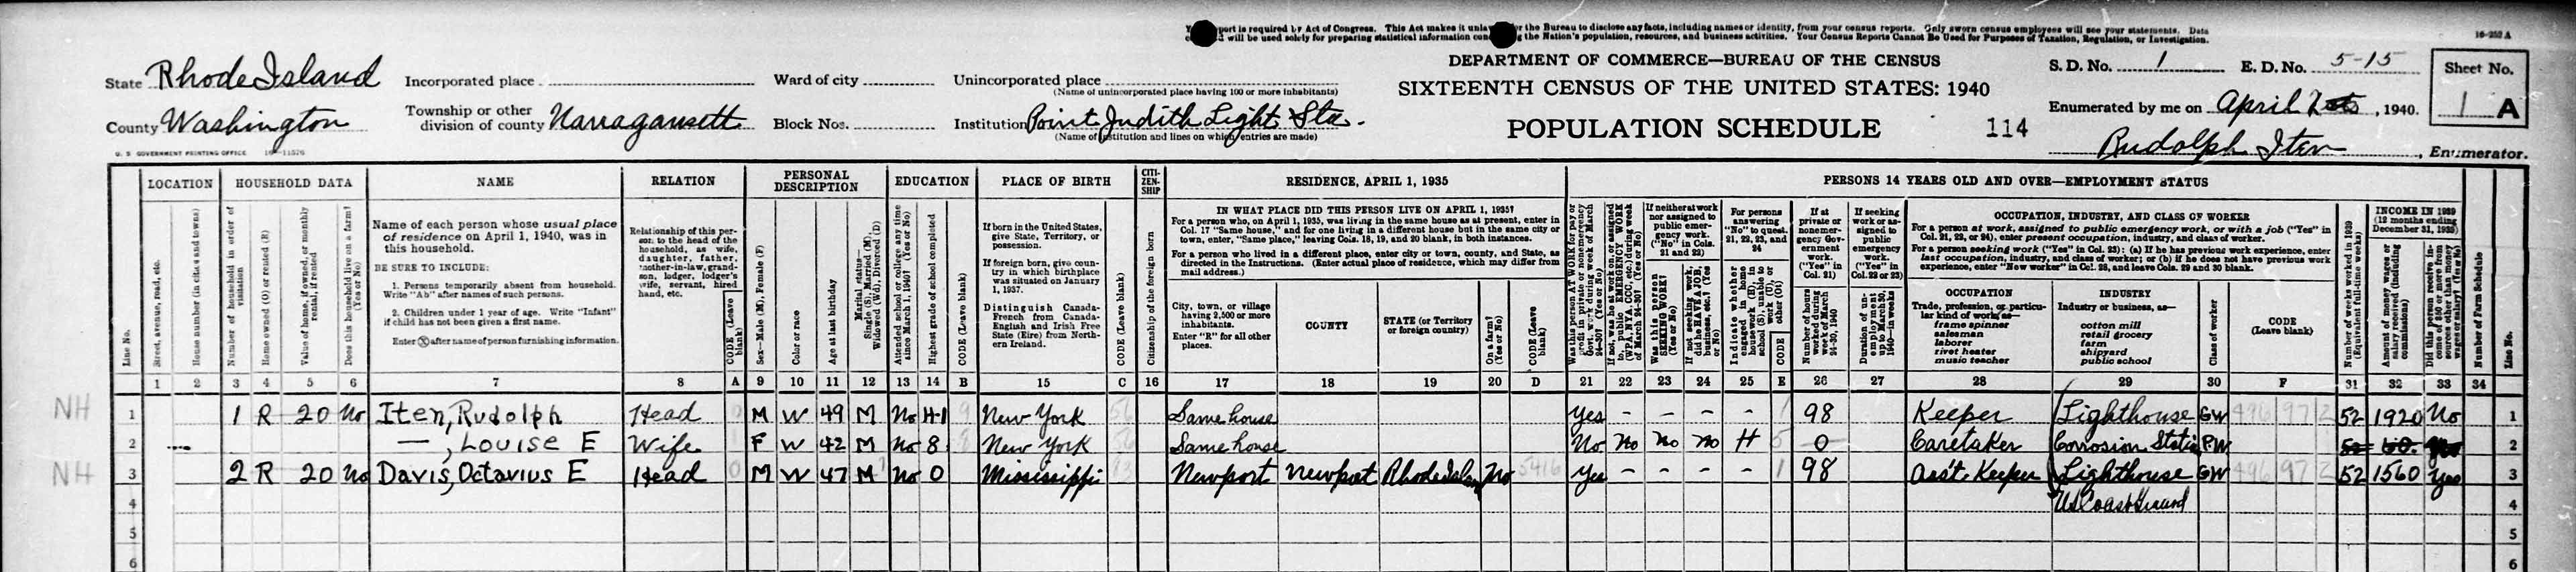 Point Judith Lighthouse 1940 Census